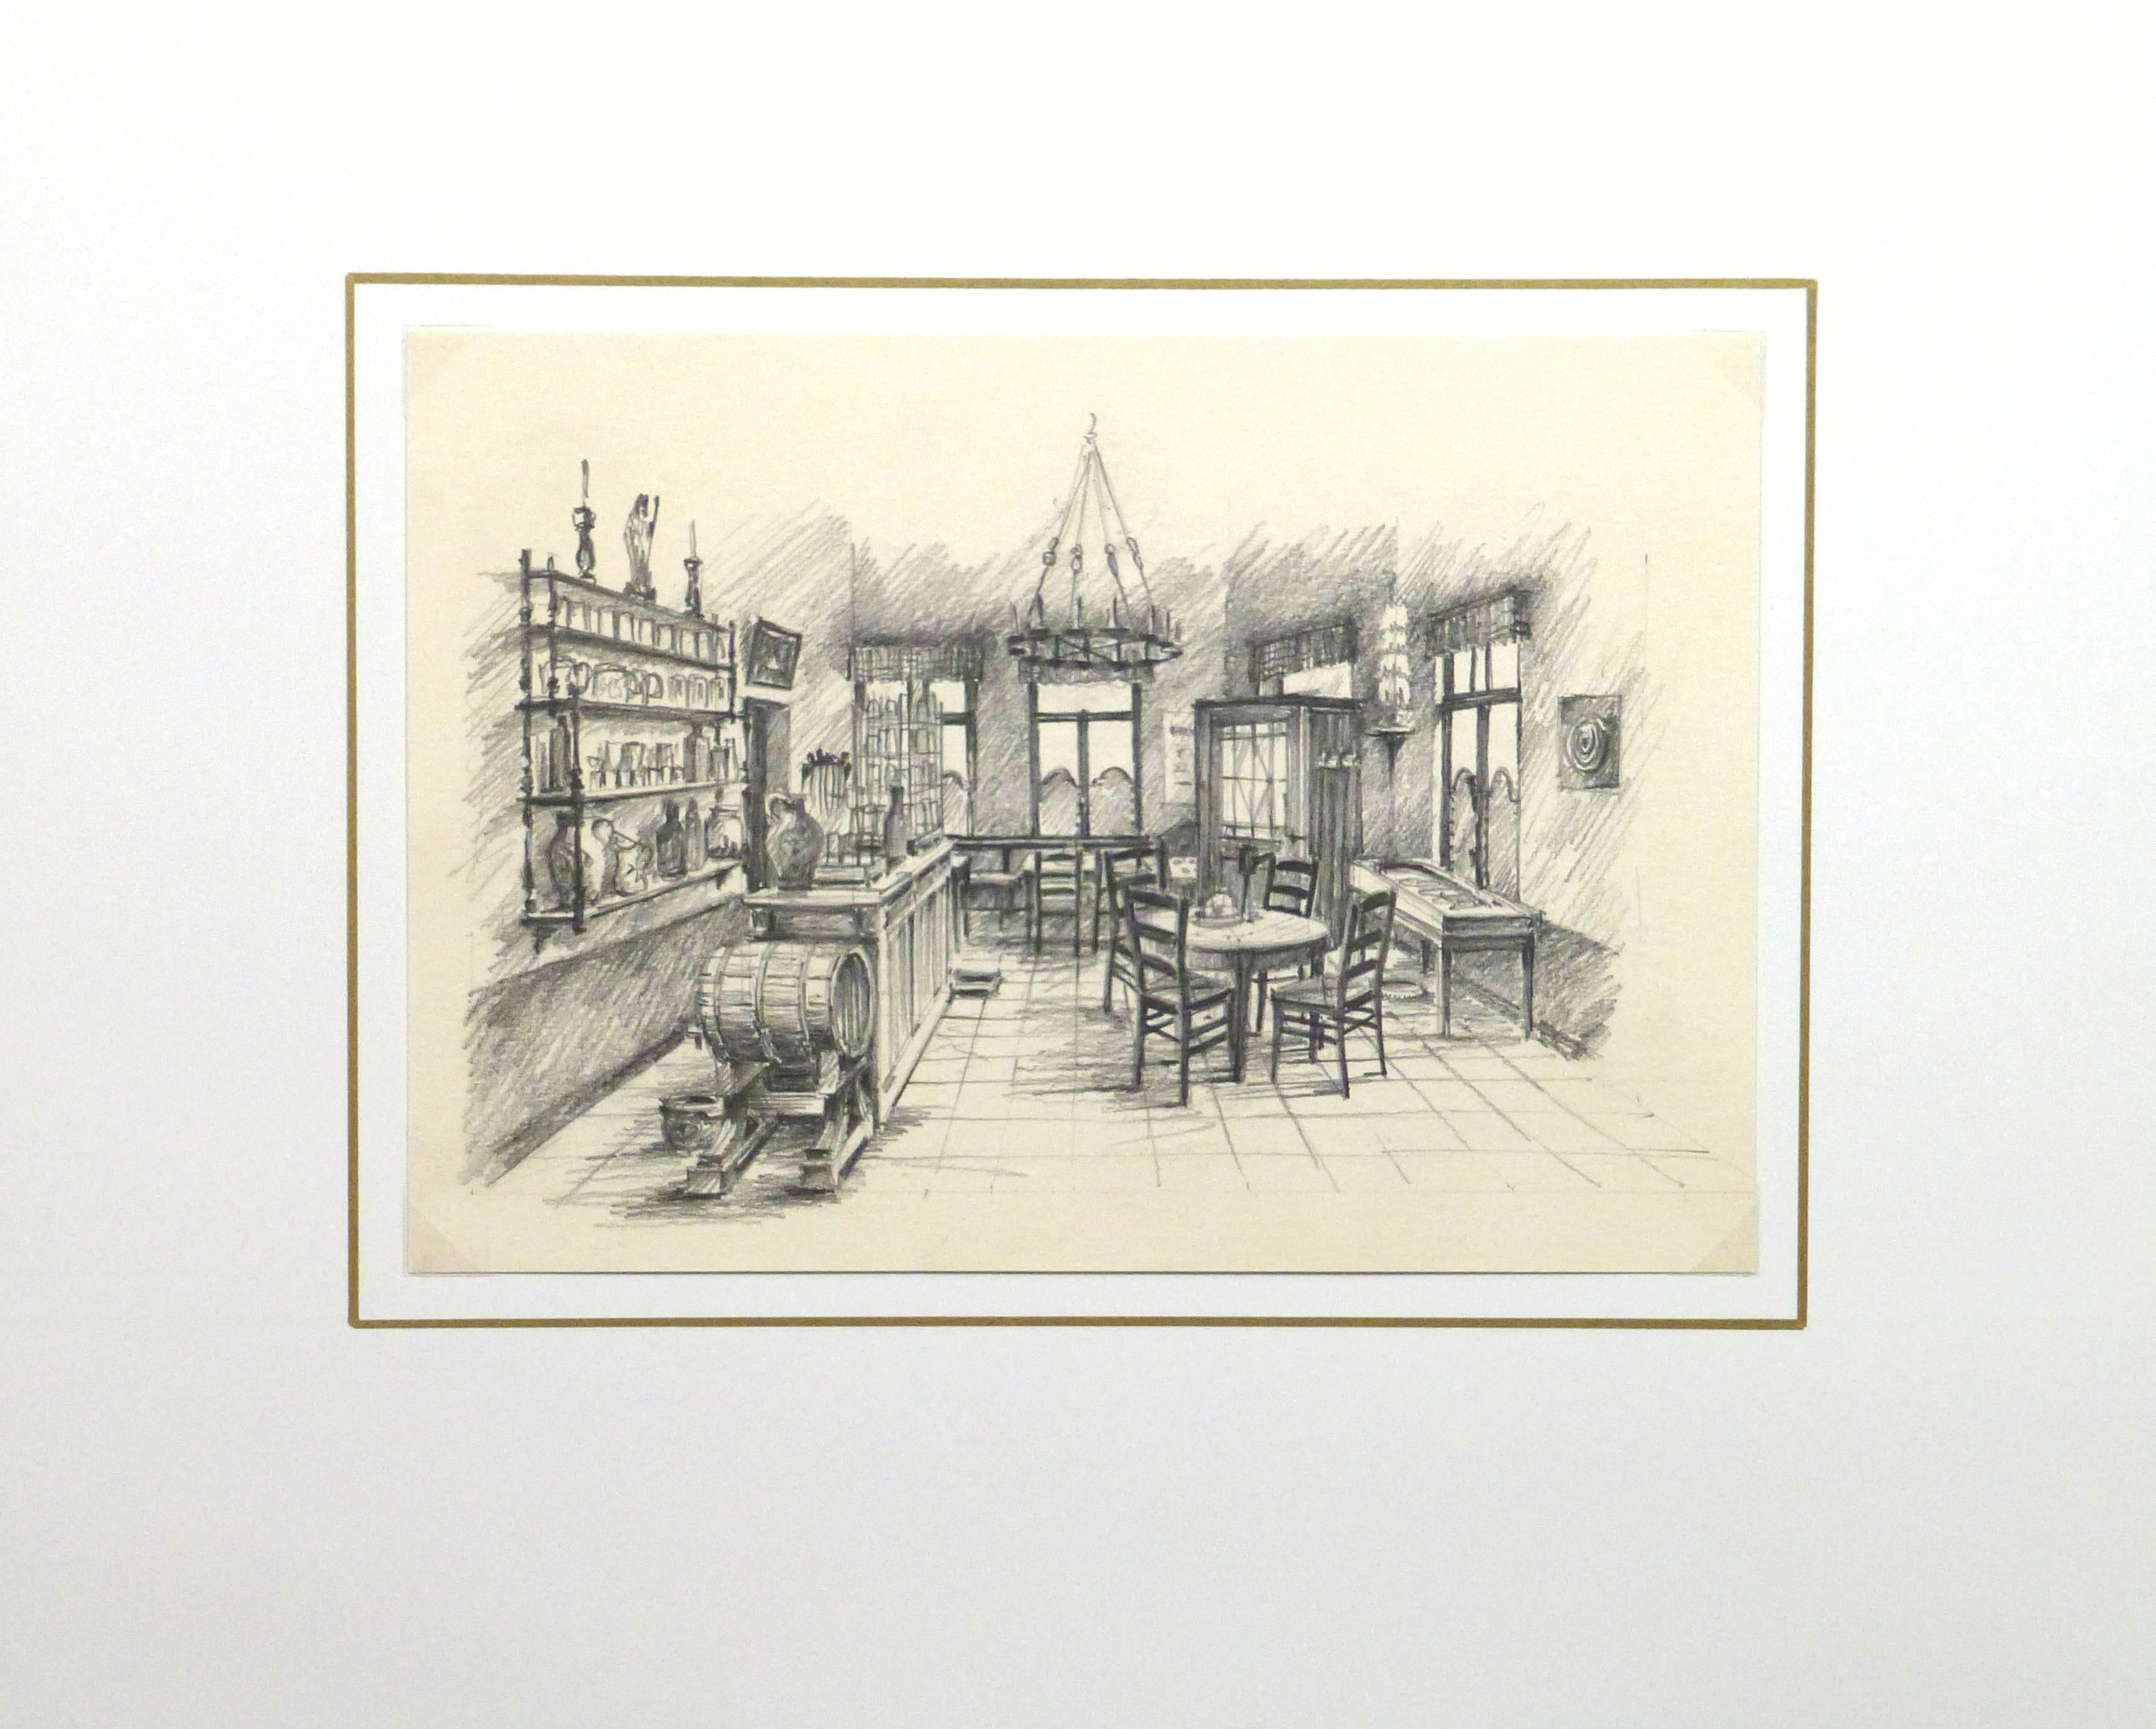 Charming pencil sketch of a theater set decorated to depict a quaint cafe, circa 1950.

Original artwork on paper displayed on a white mat with a gold border. Archival plastic sleeve and Certificate of Authenticity included. Artwork, 12"L x